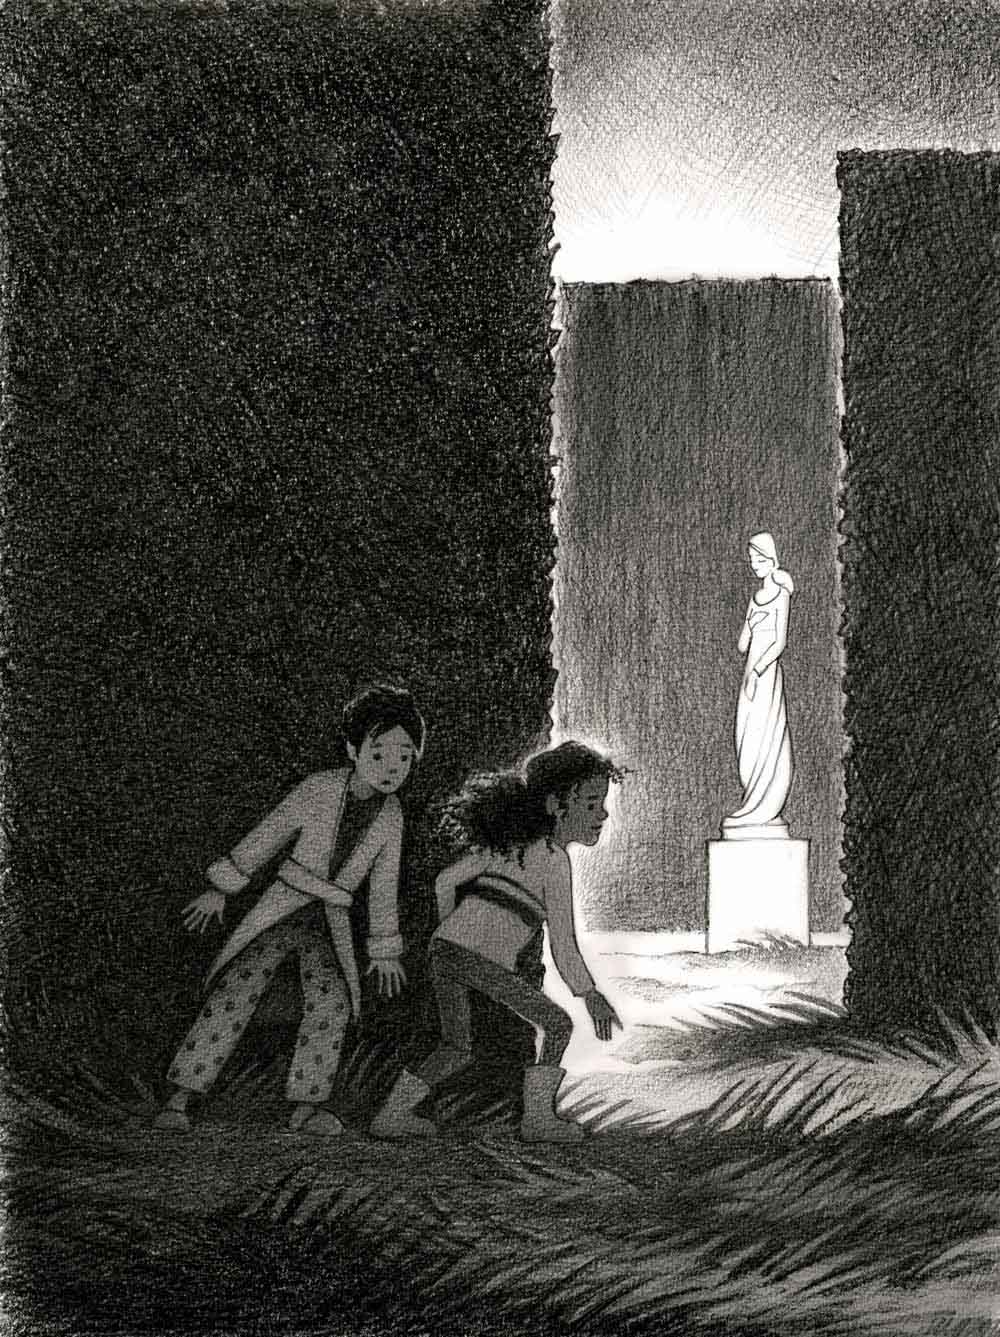 Pencil drawing by Jessica Lanan of a light-skinned boy and a dark-skinned girl peeking around the edge of a large hedge. In the background, more hedges frame a white marble statue of a woman in a white dress.